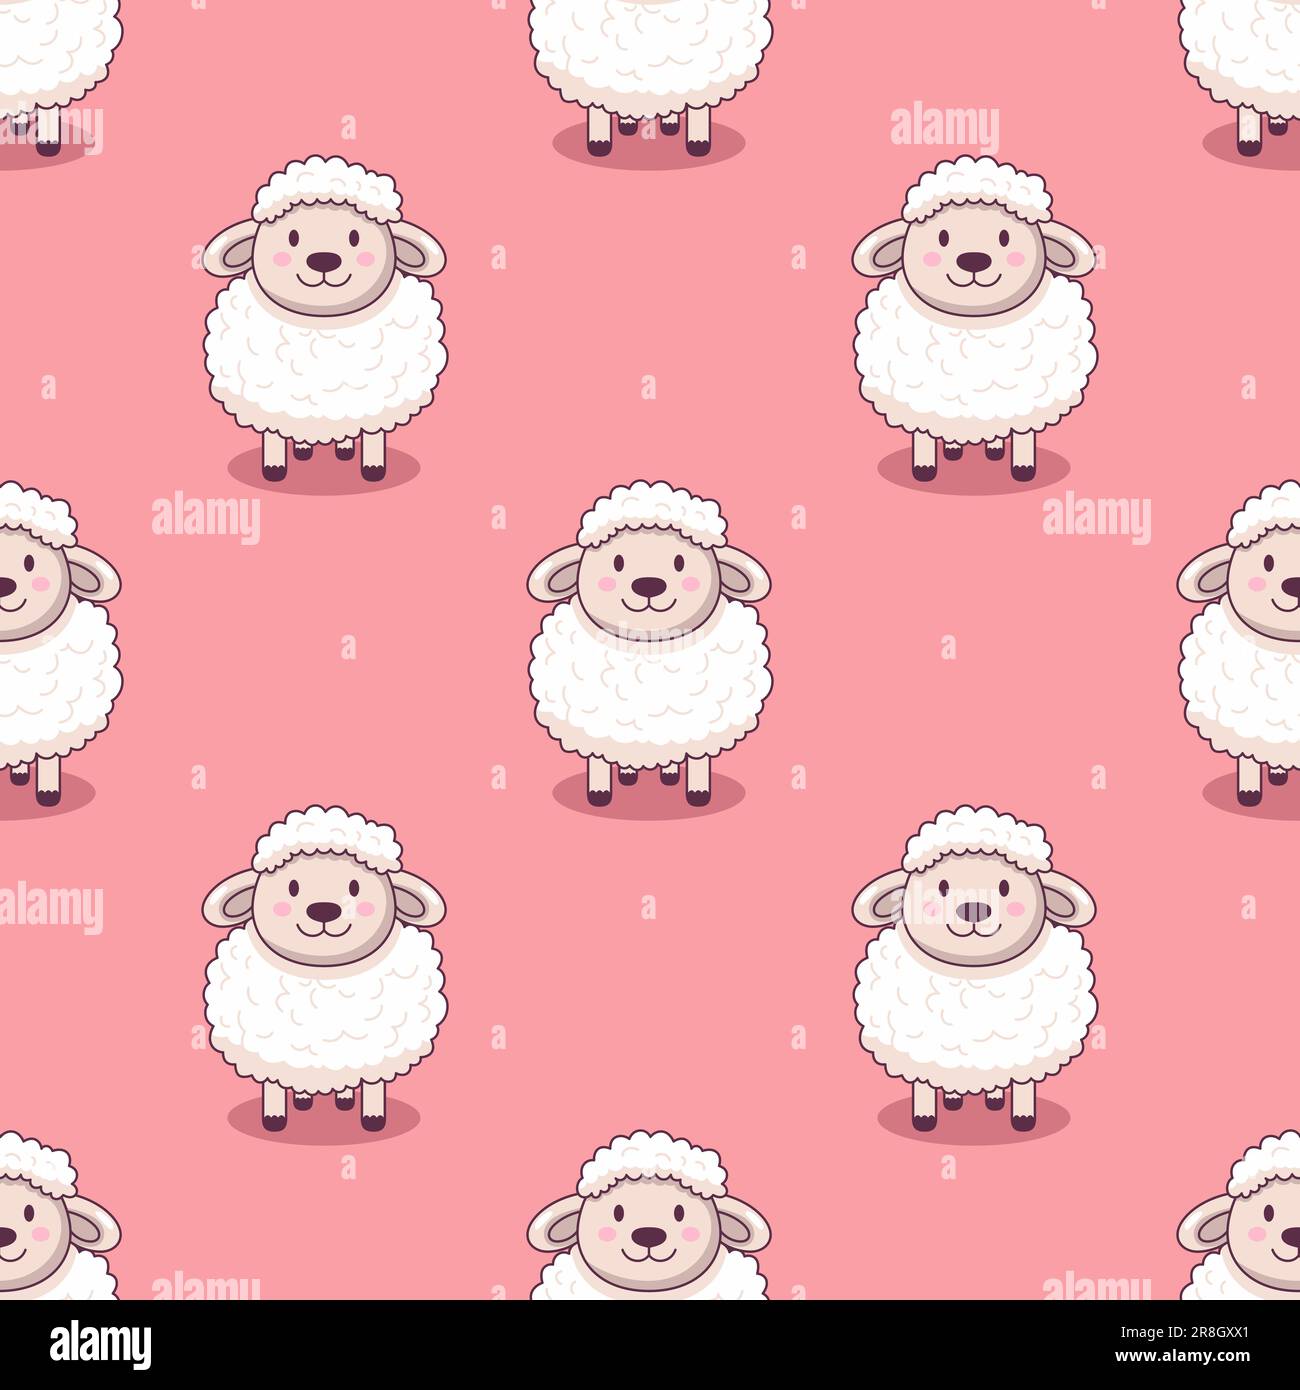 https://c8.alamy.com/comp/2R8GXX1/vector-seamless-pattern-with-funny-cute-sheep-on-pink-background-cartoon-sheep-seamless-texture-textile-wallpaper-design-for-kids-seamless-texture-2R8GXX1.jpg